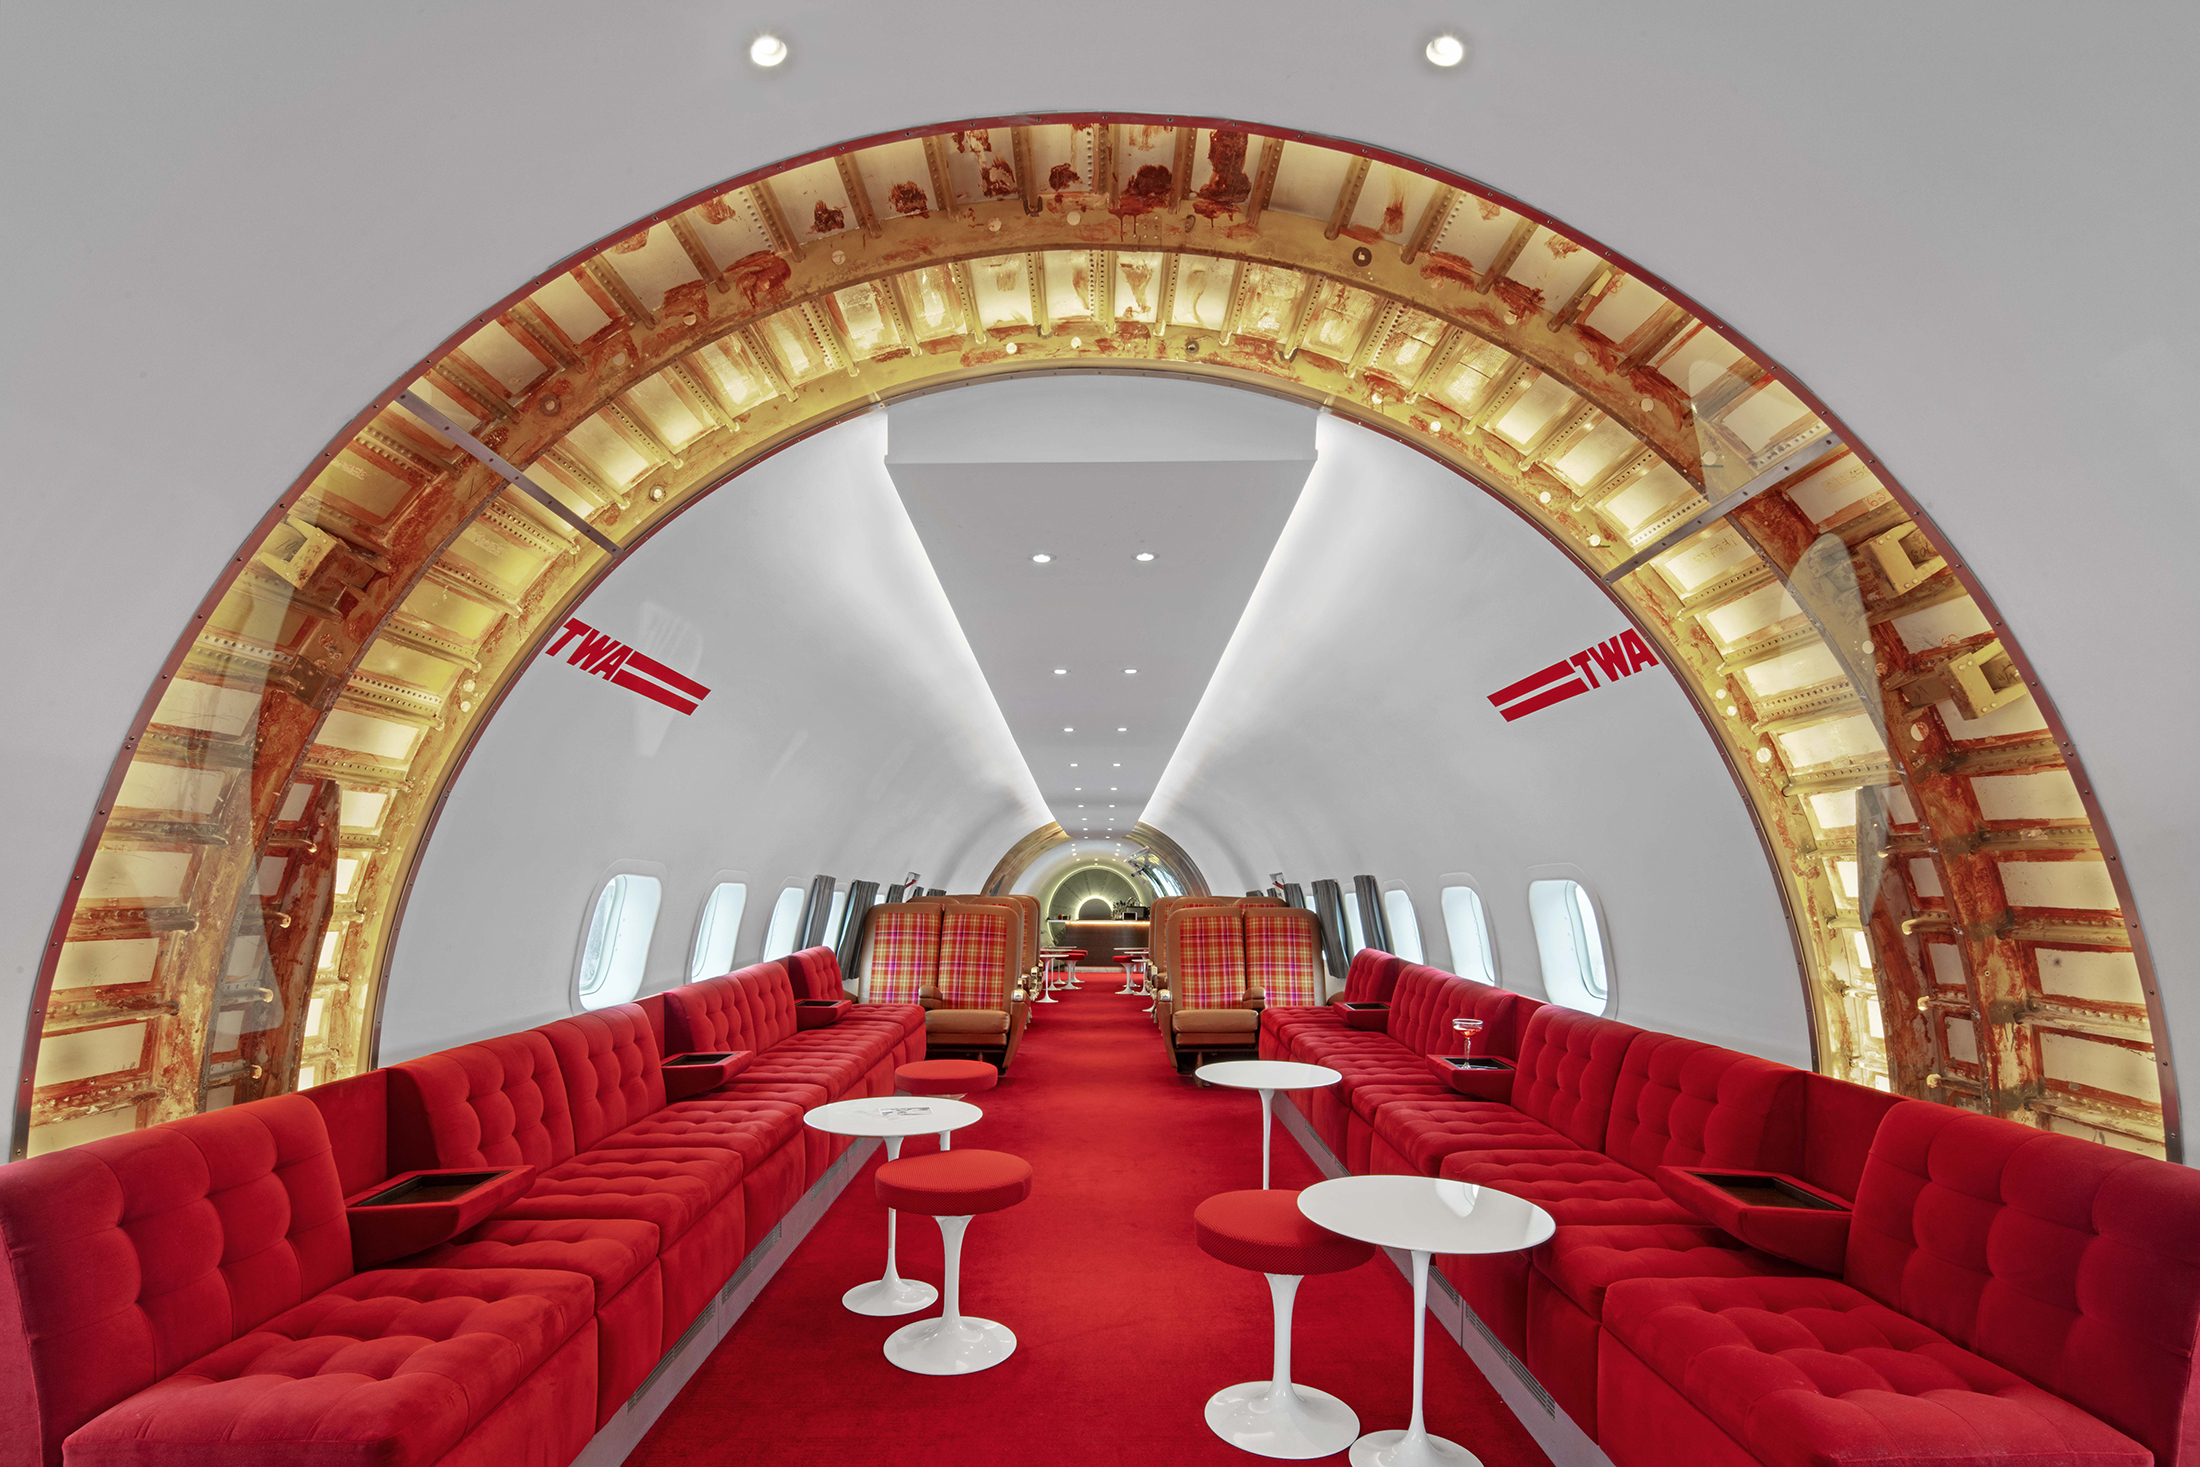 The Connie Lounge at the TWA Hotel